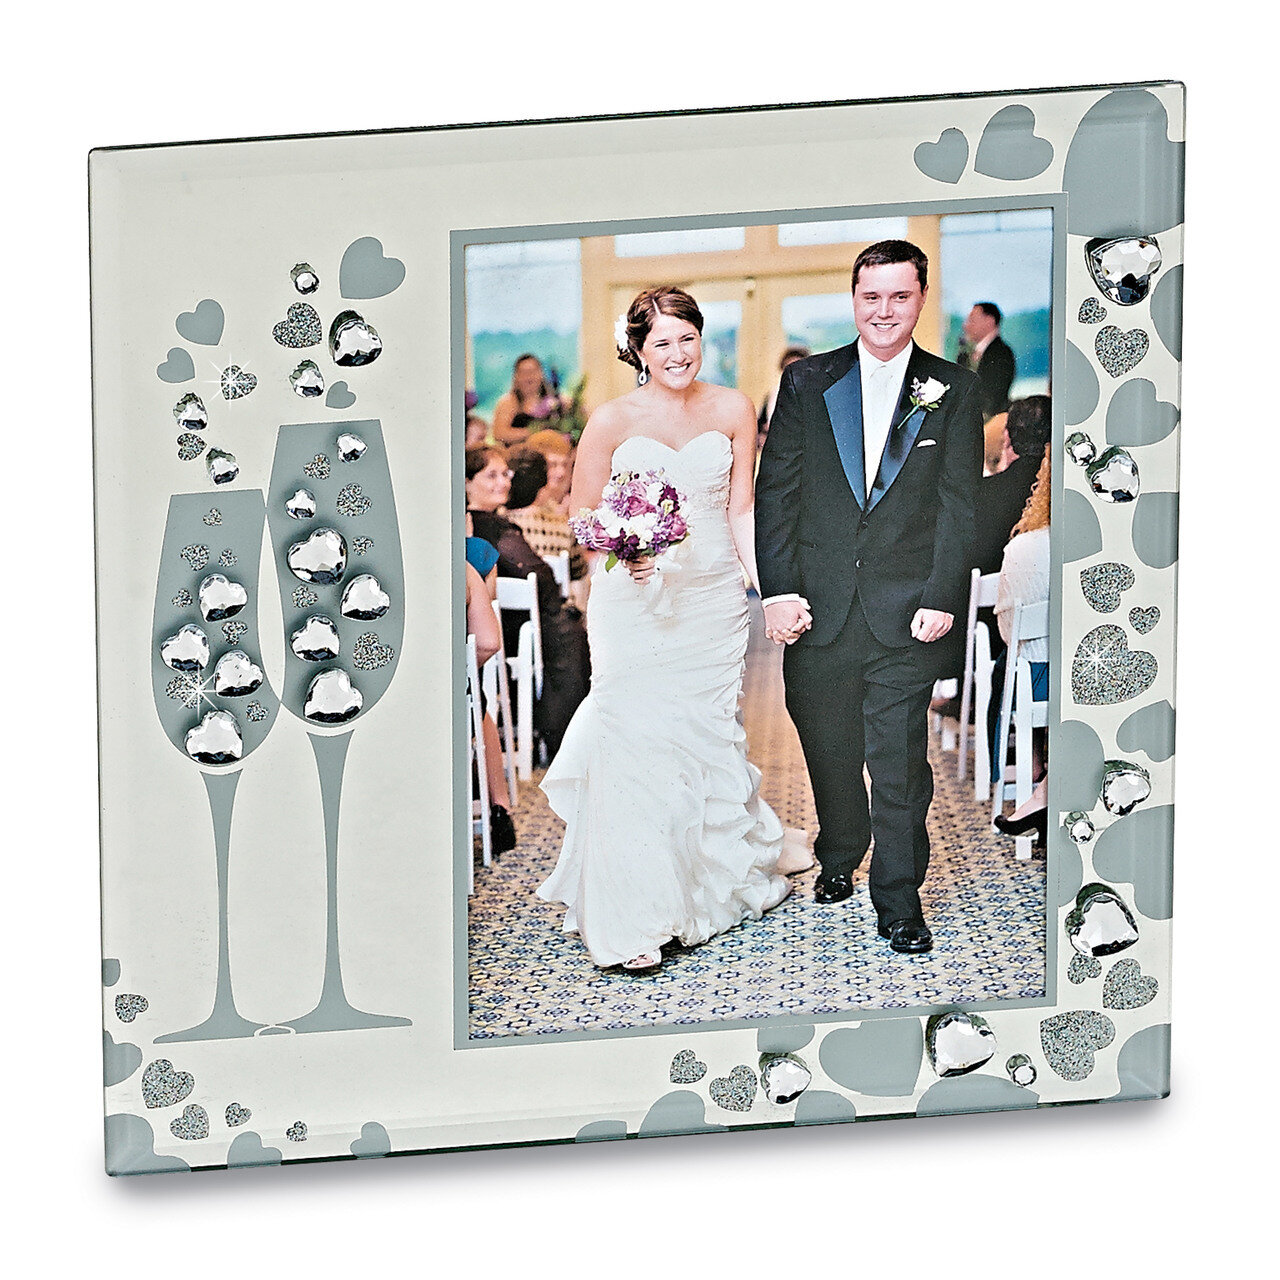 Glass Sparkling Toasting Flutes 5 x 7 Inch Photo Picture Frame GM14668